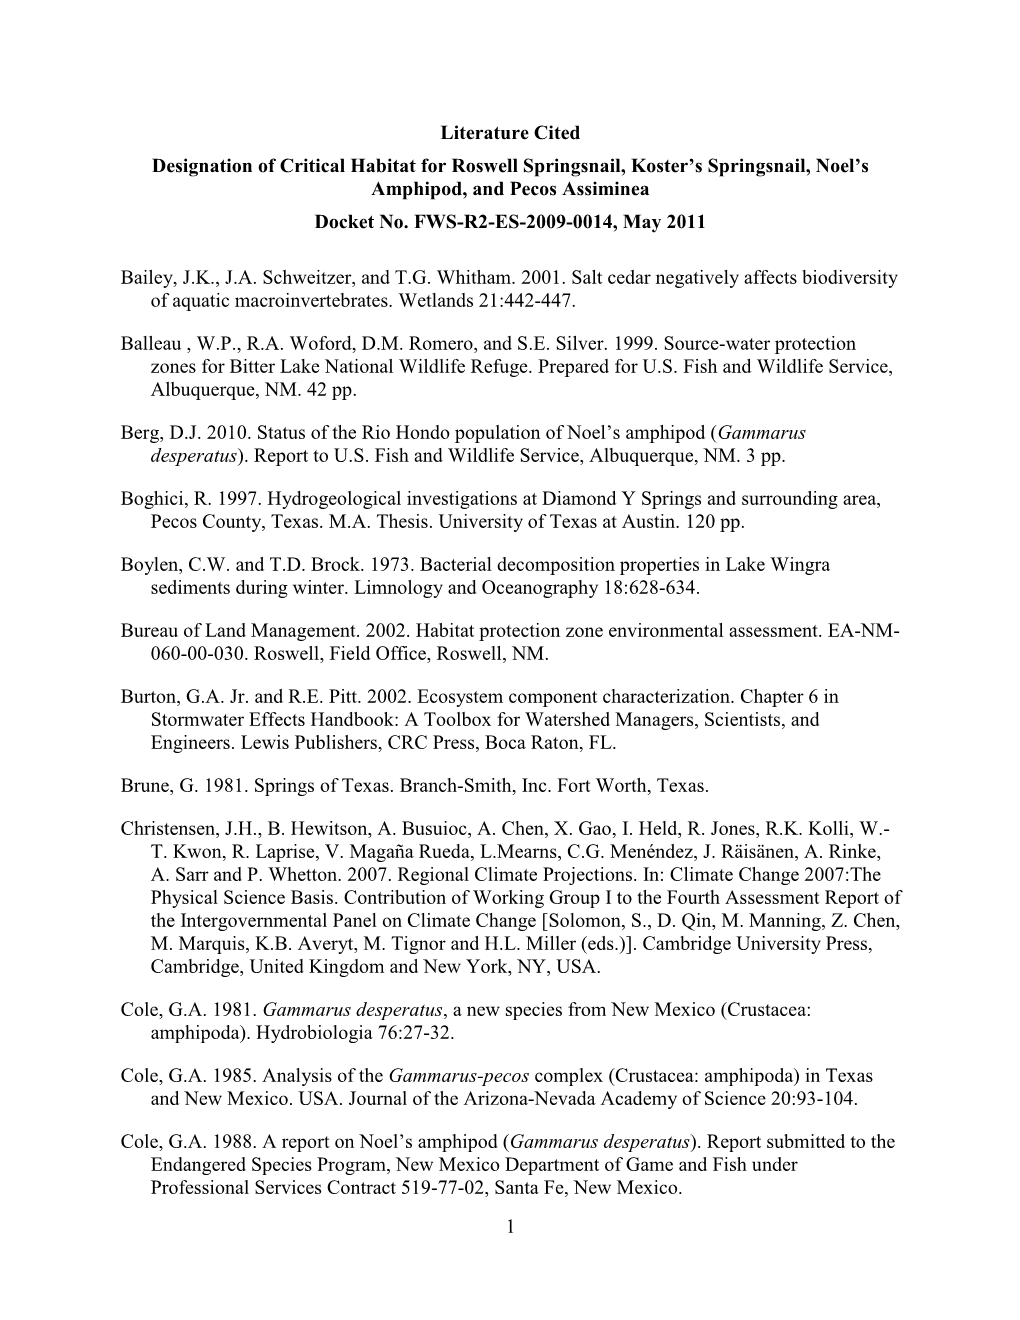 Literature Cited Designation of Critical Habitat for Roswell Springsnail, Koster’S Springsnail, Noel’S Amphipod, and Pecos Assiminea Docket No